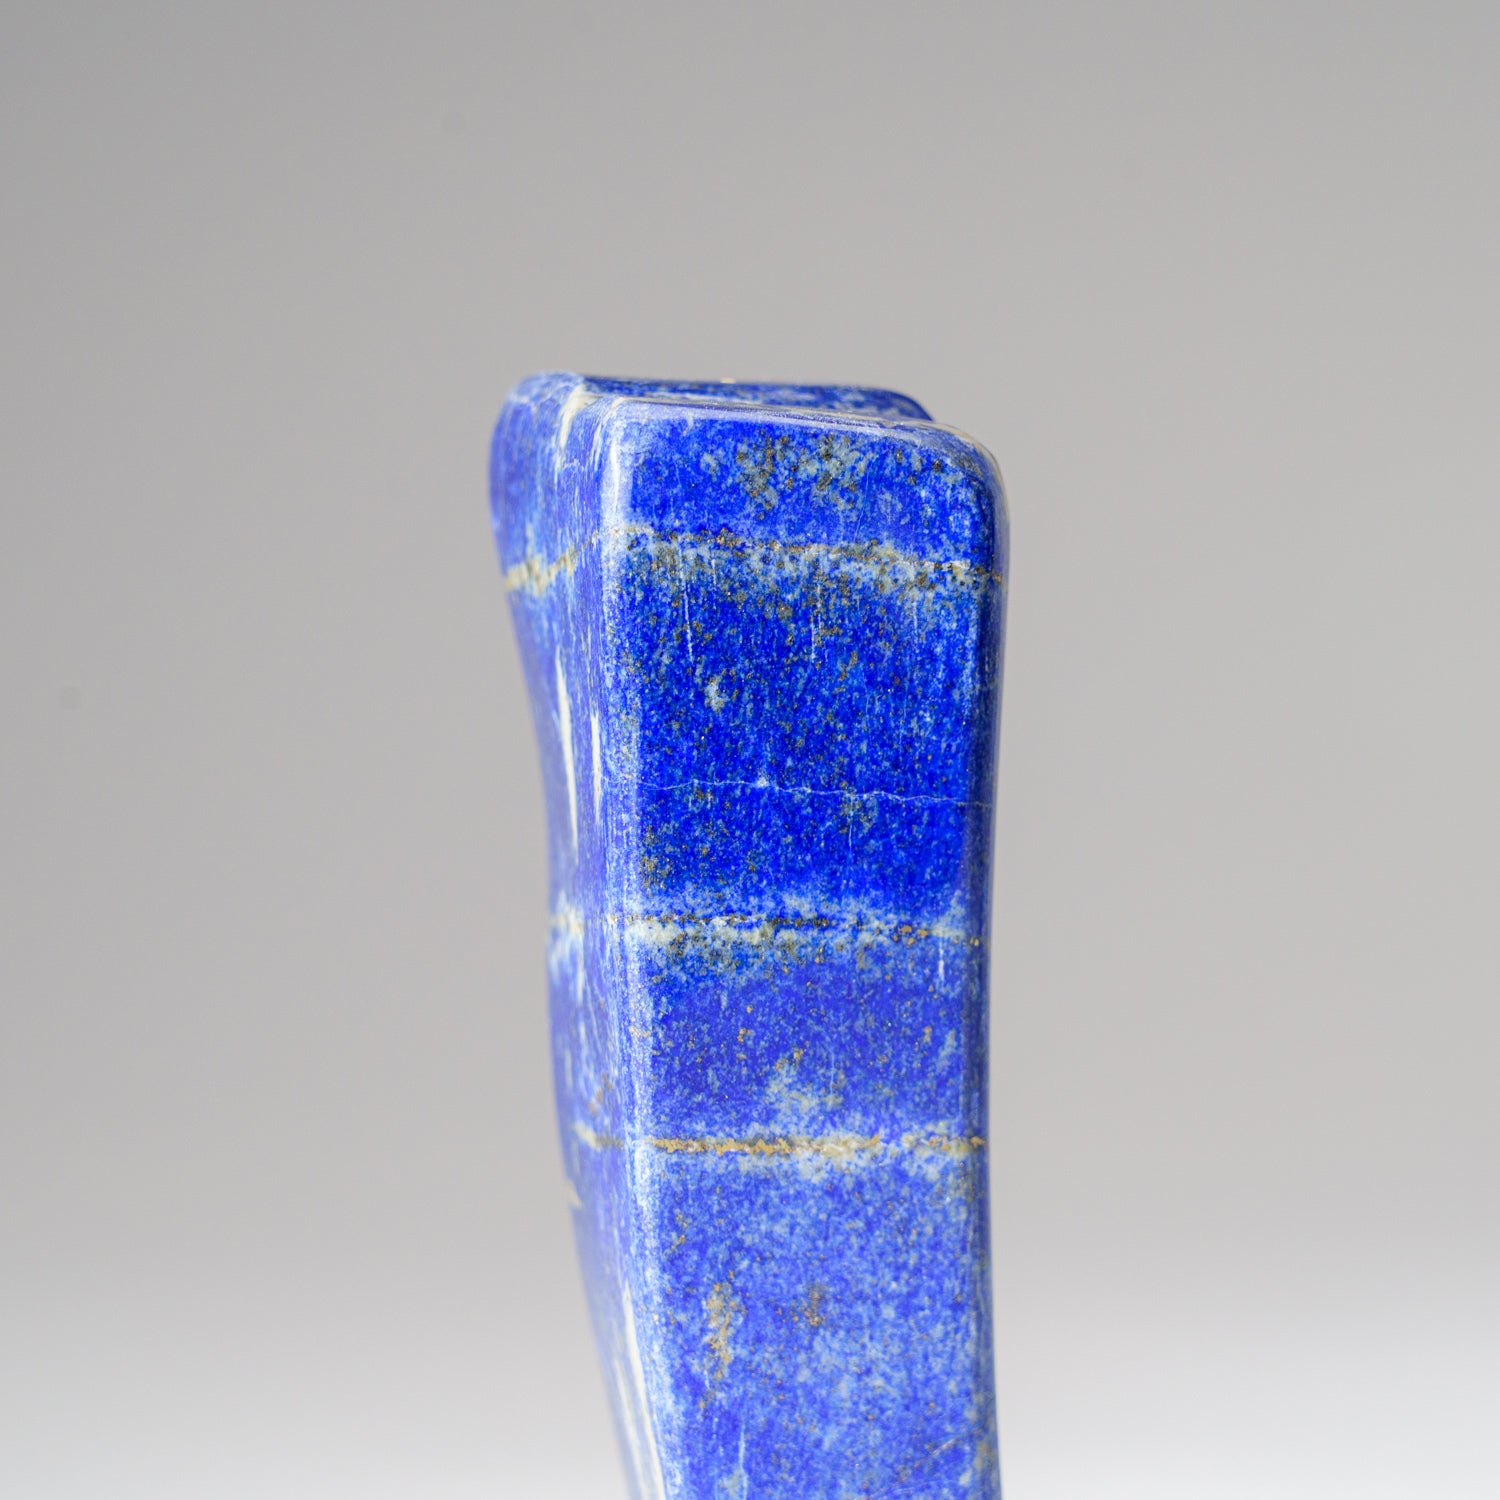 Polished Lapis Lazuli Freeform from Afghanistan (404 grams)